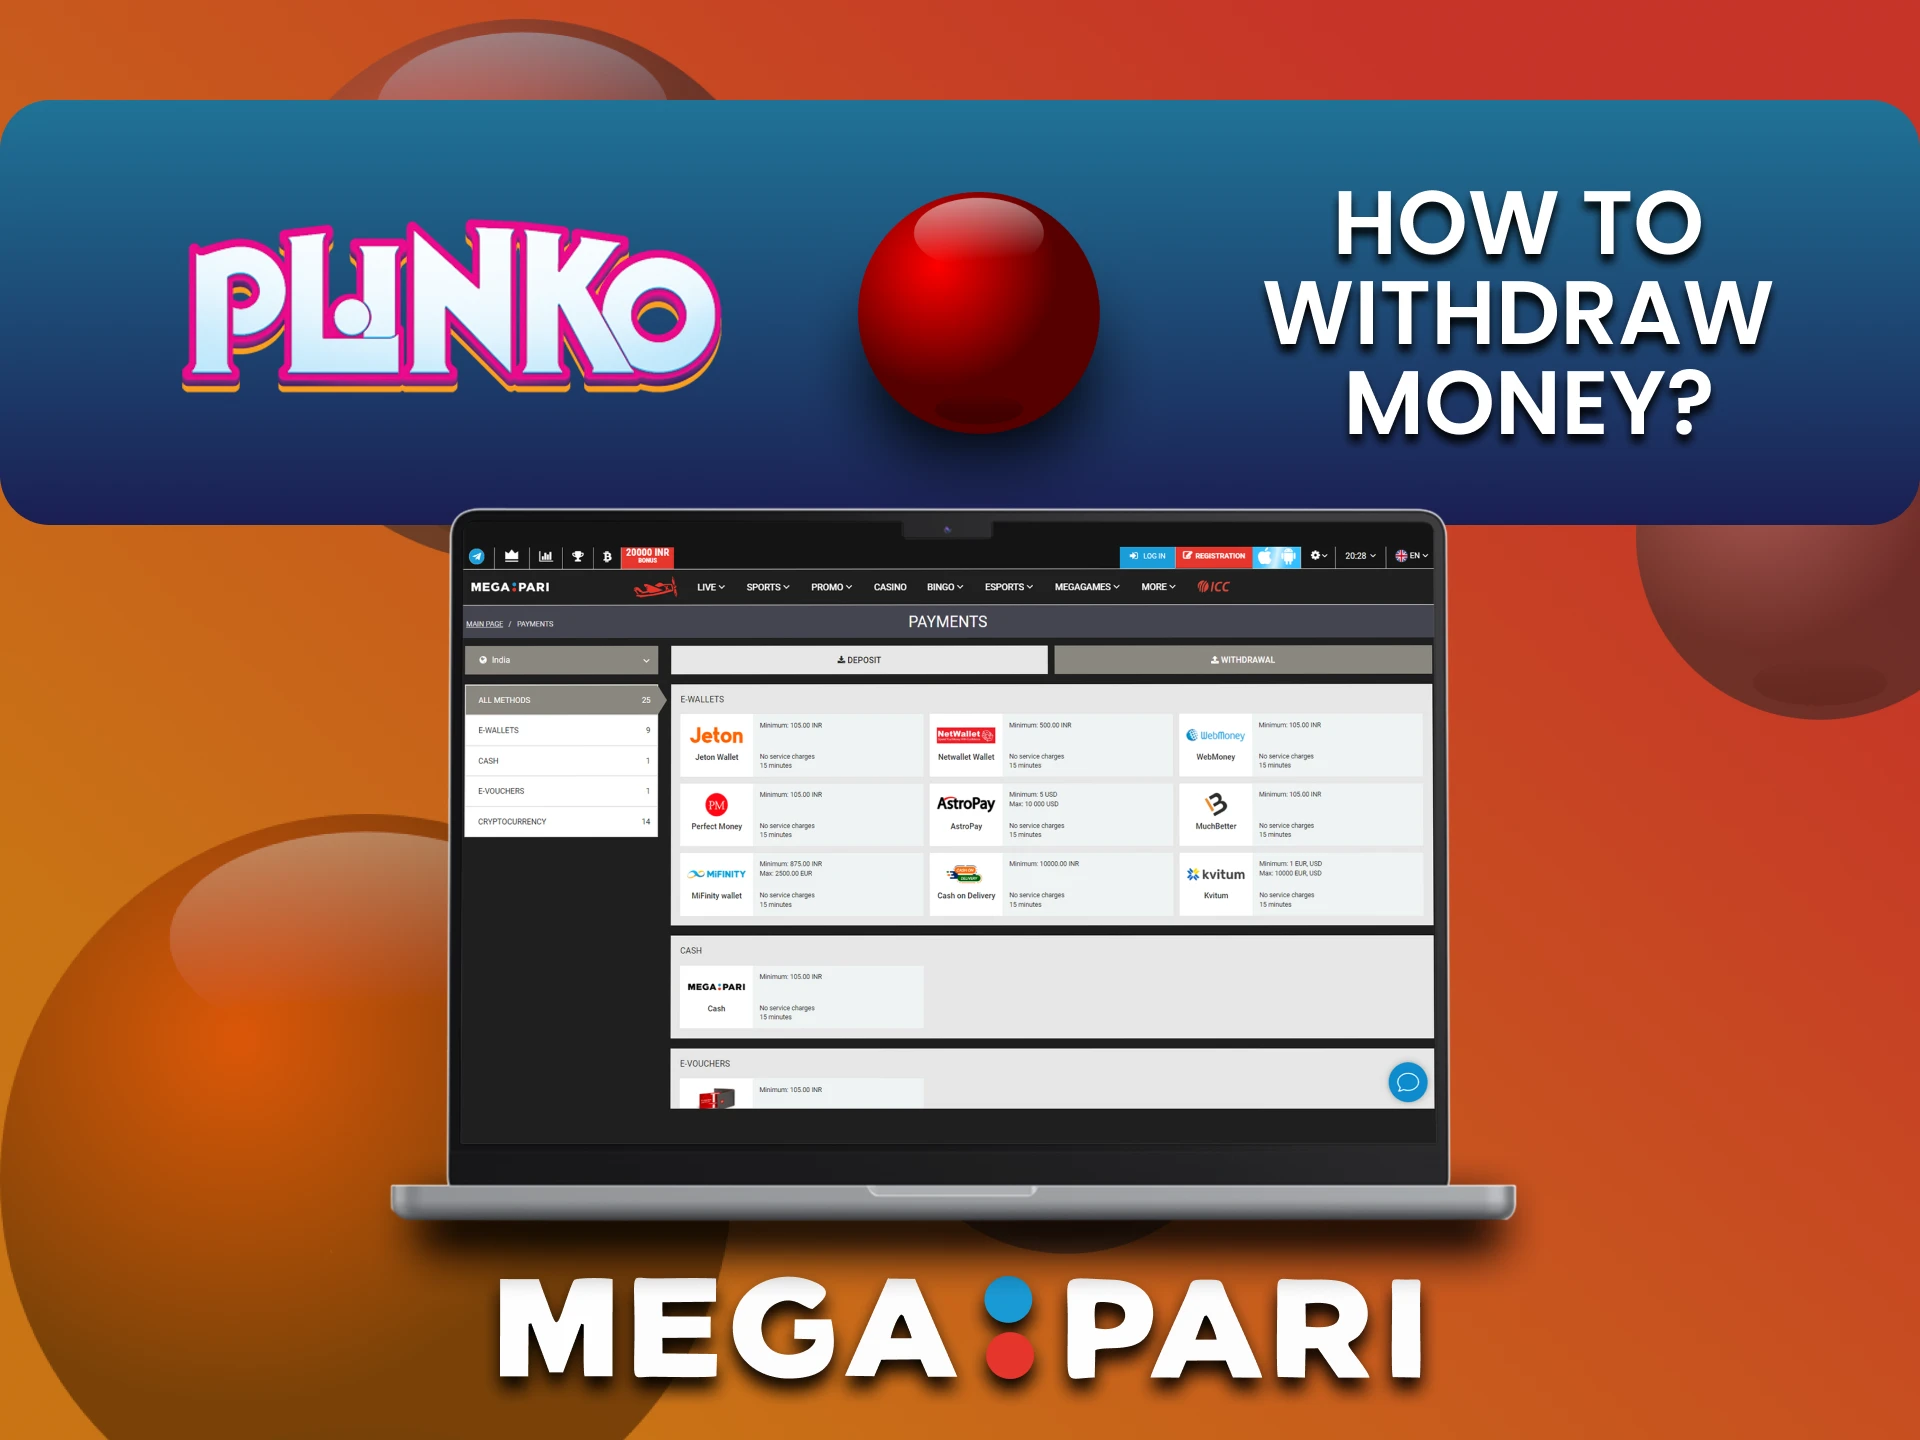 Find out how to withdraw funds for Plinko on Megapari.